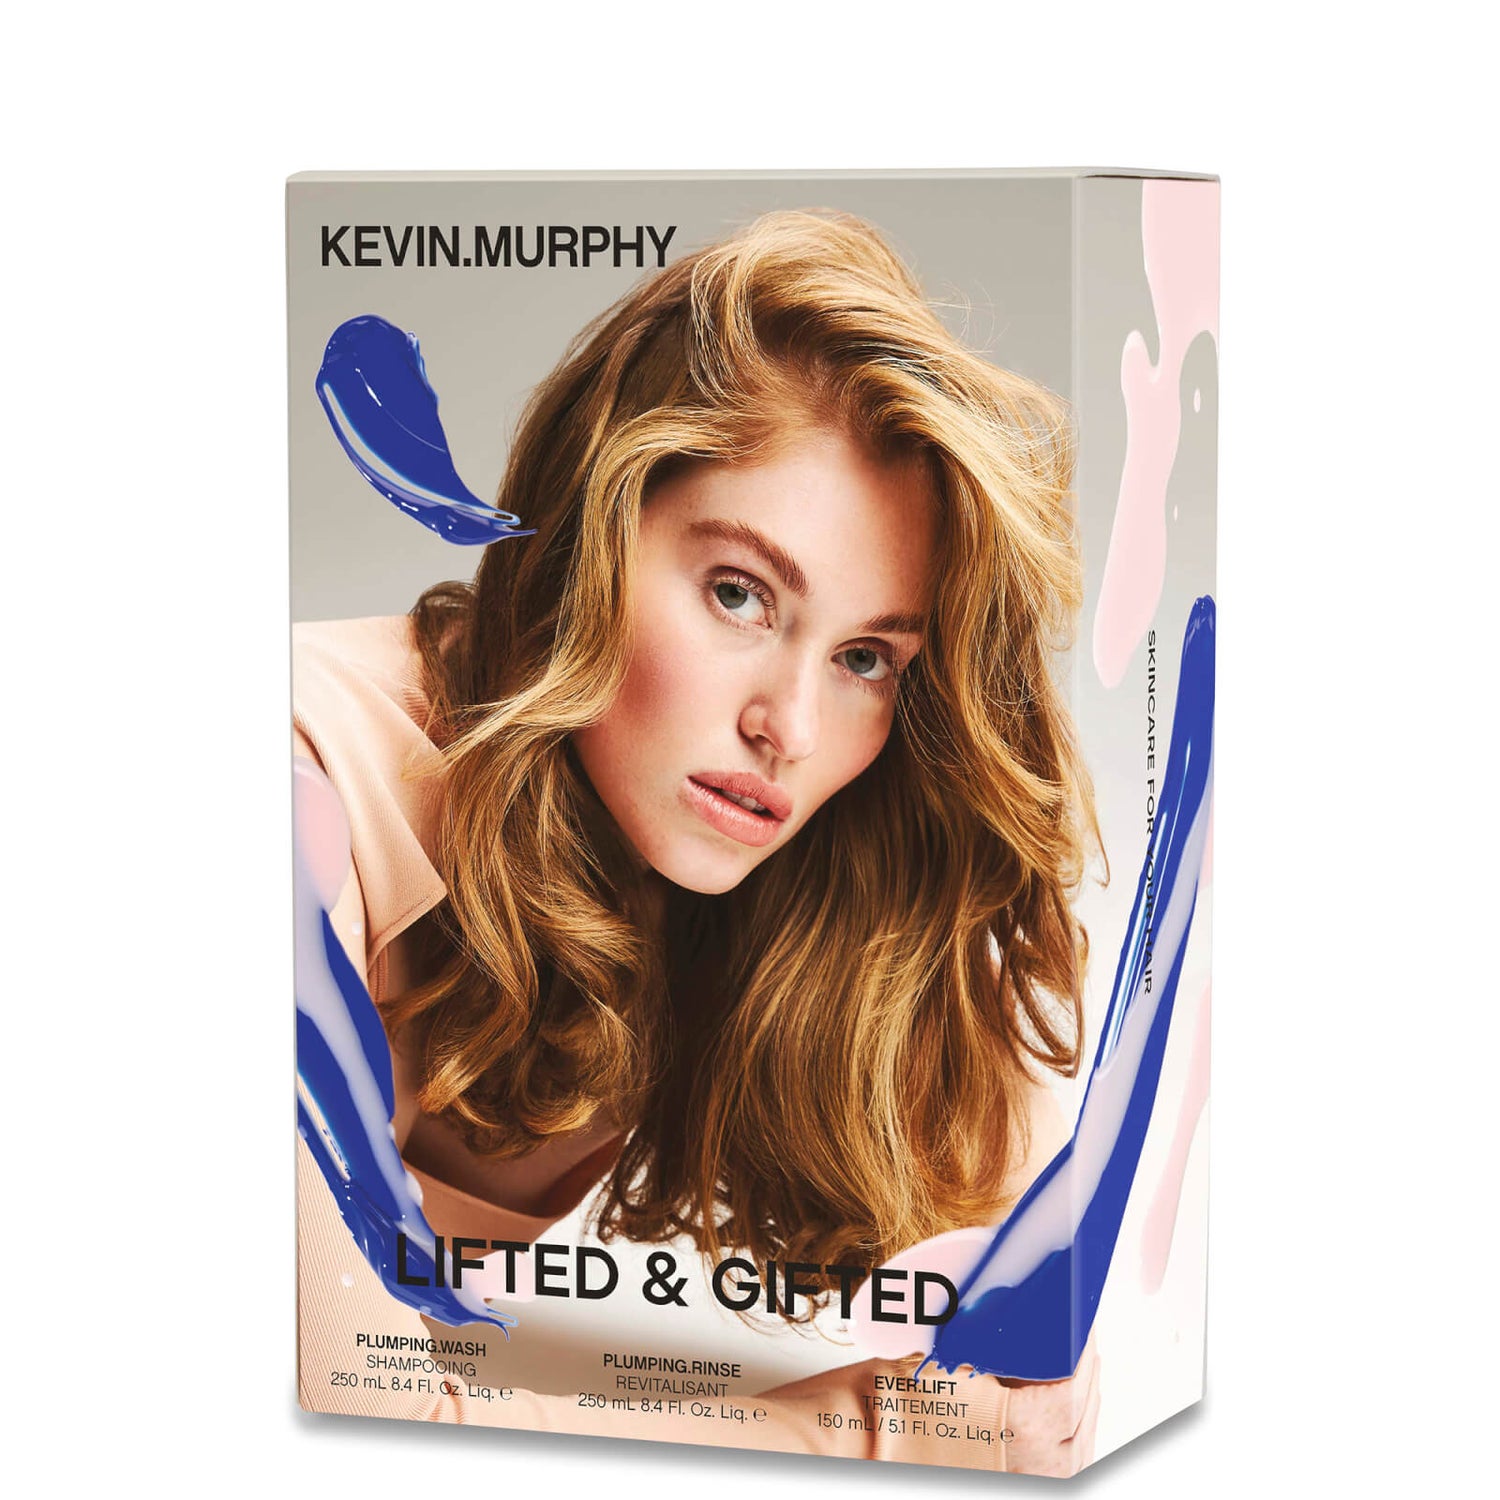 KEVIN MURPHY Lifted and Gifted Set